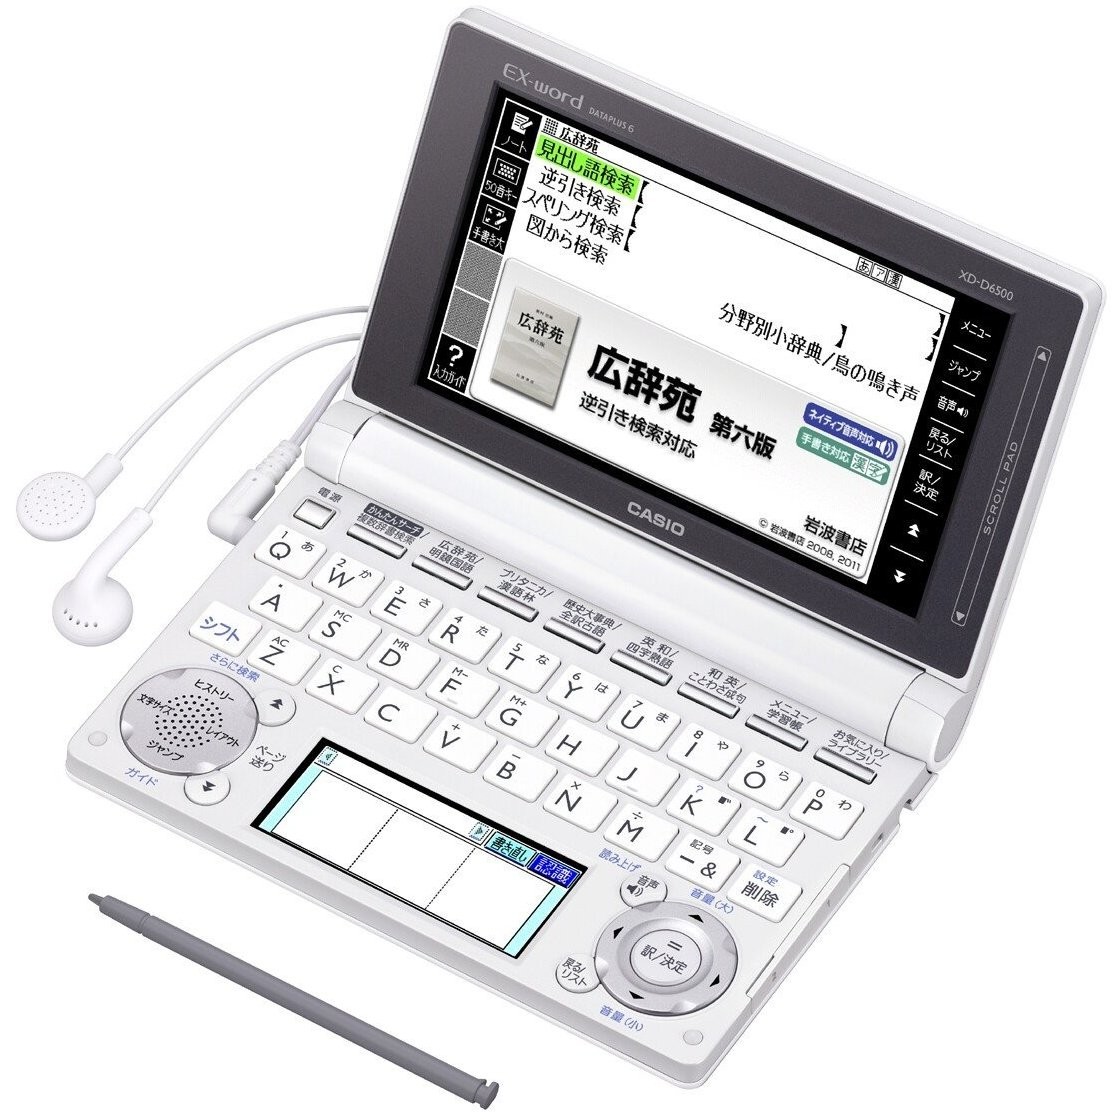 CASIO Ex-word electronic dictionary XD-A10000 flagship model twin touch panel v 